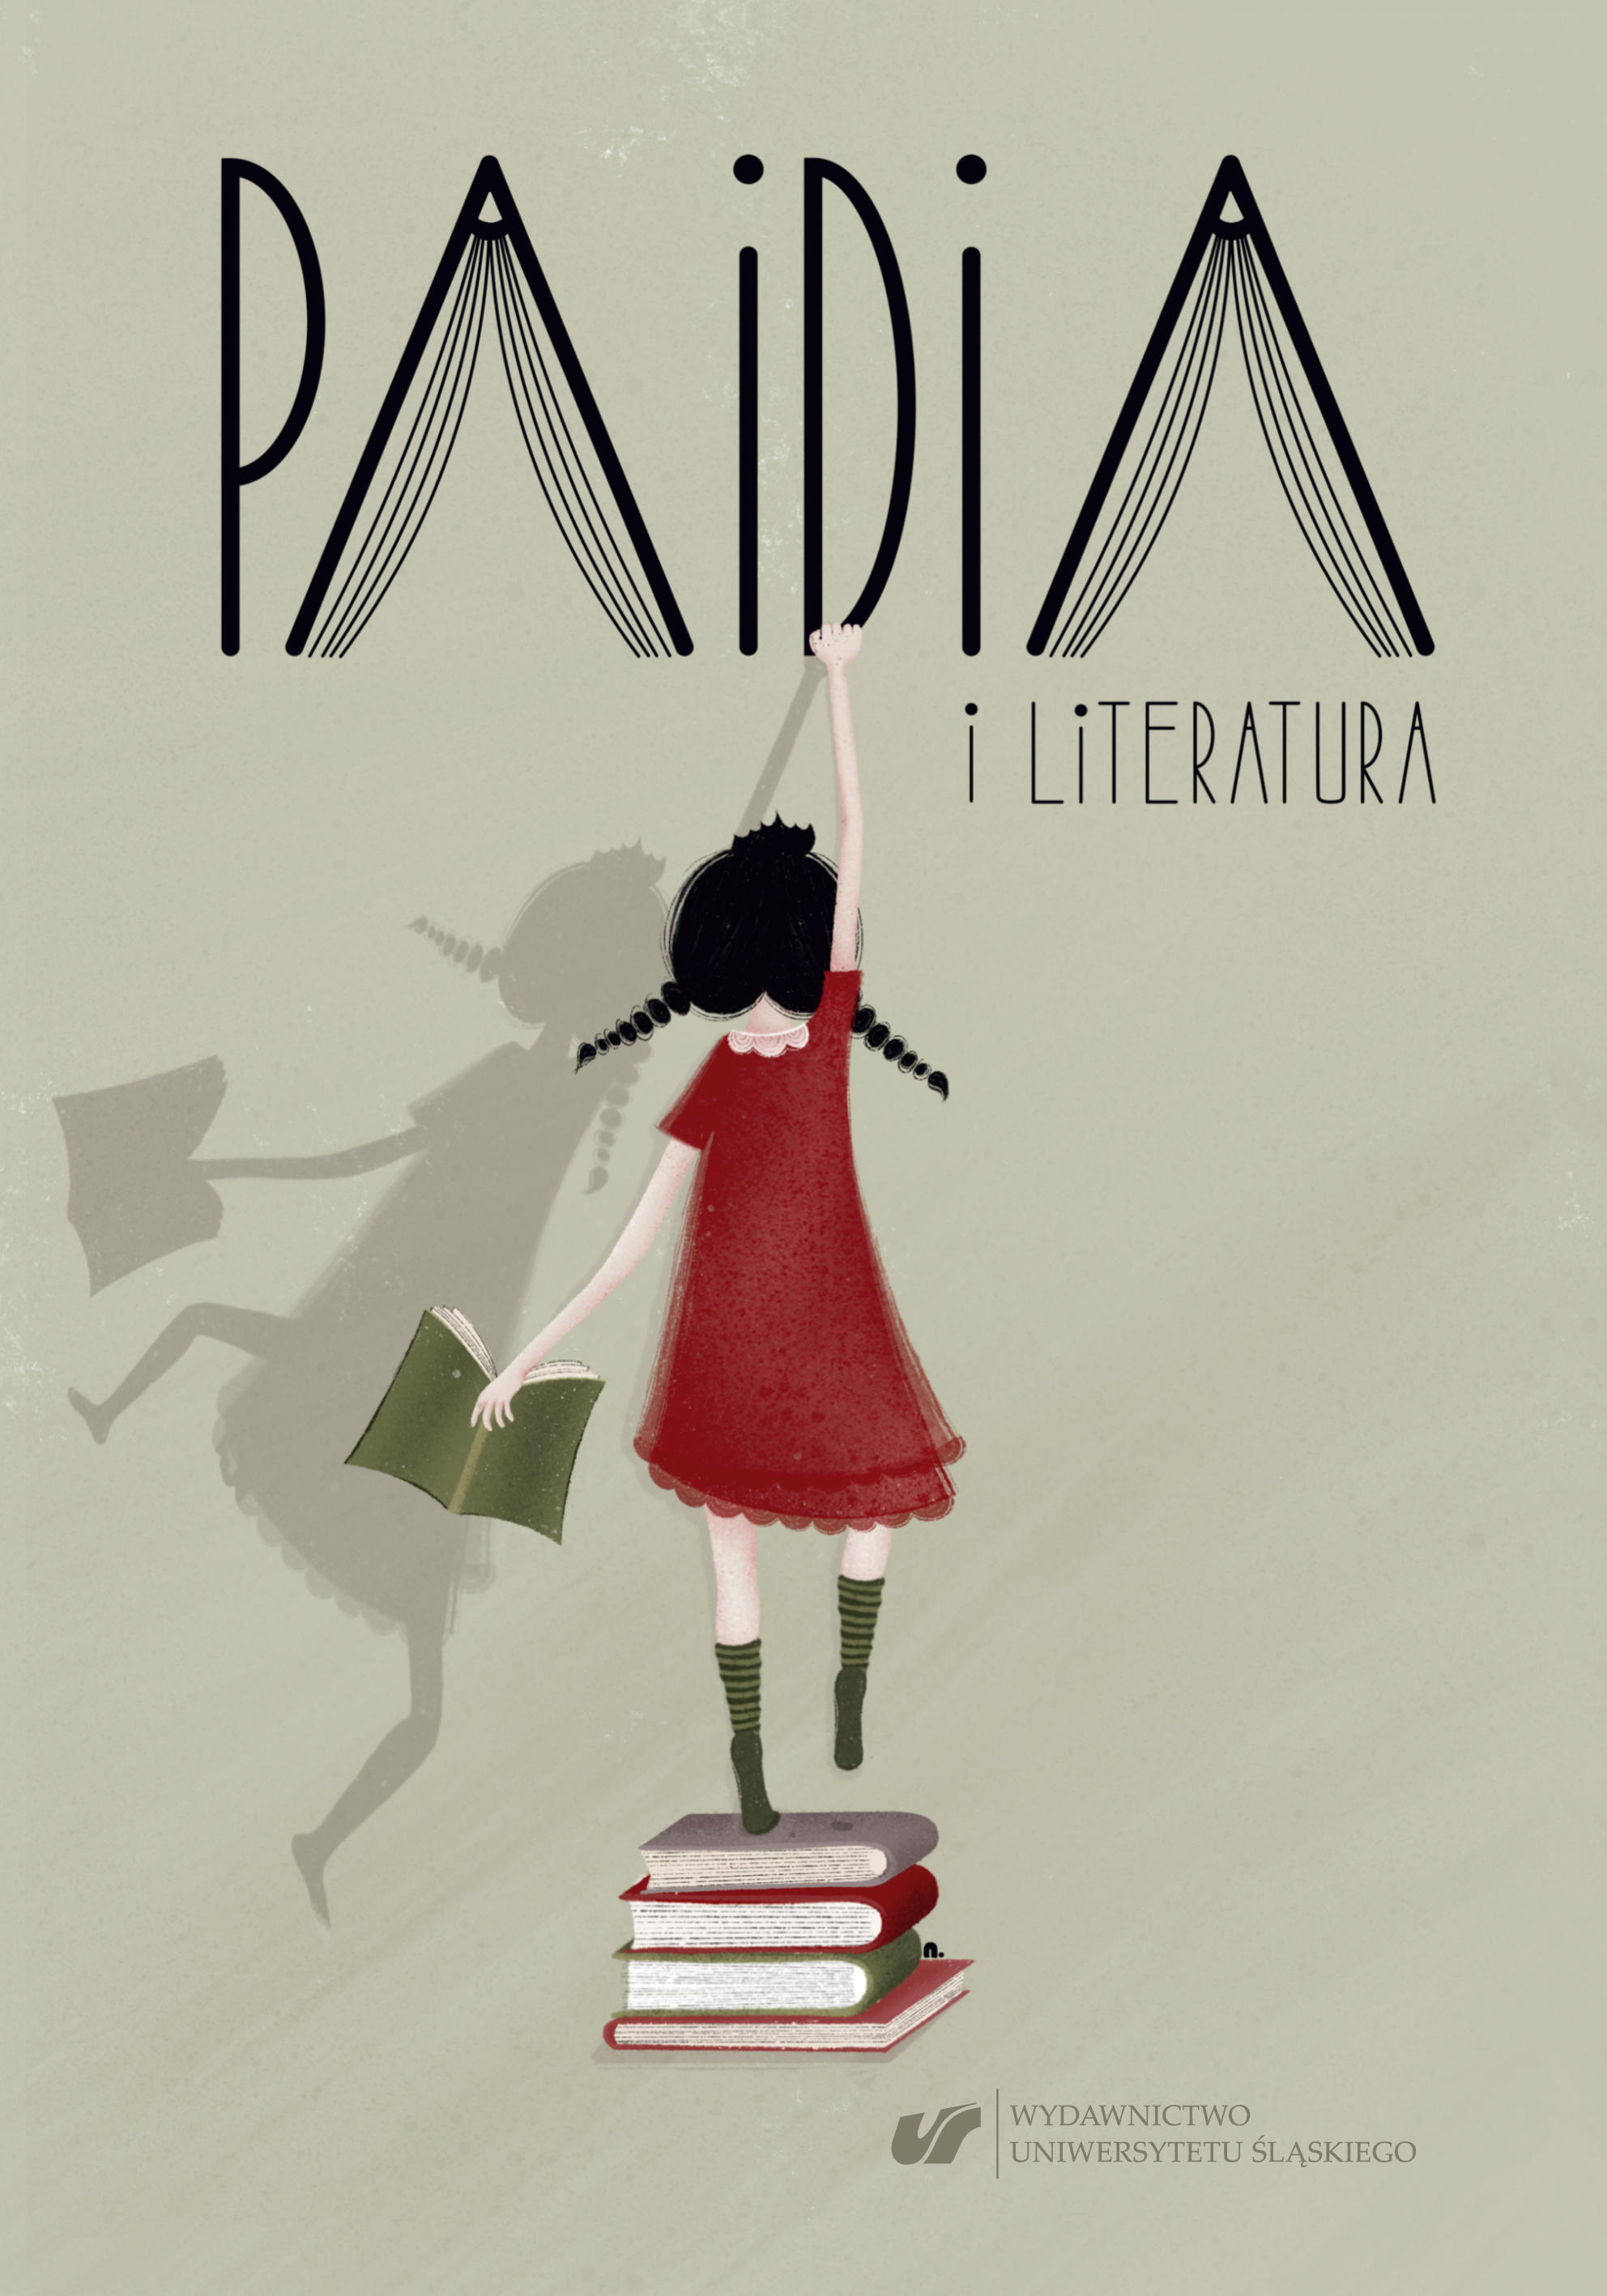 Paidia and Literature